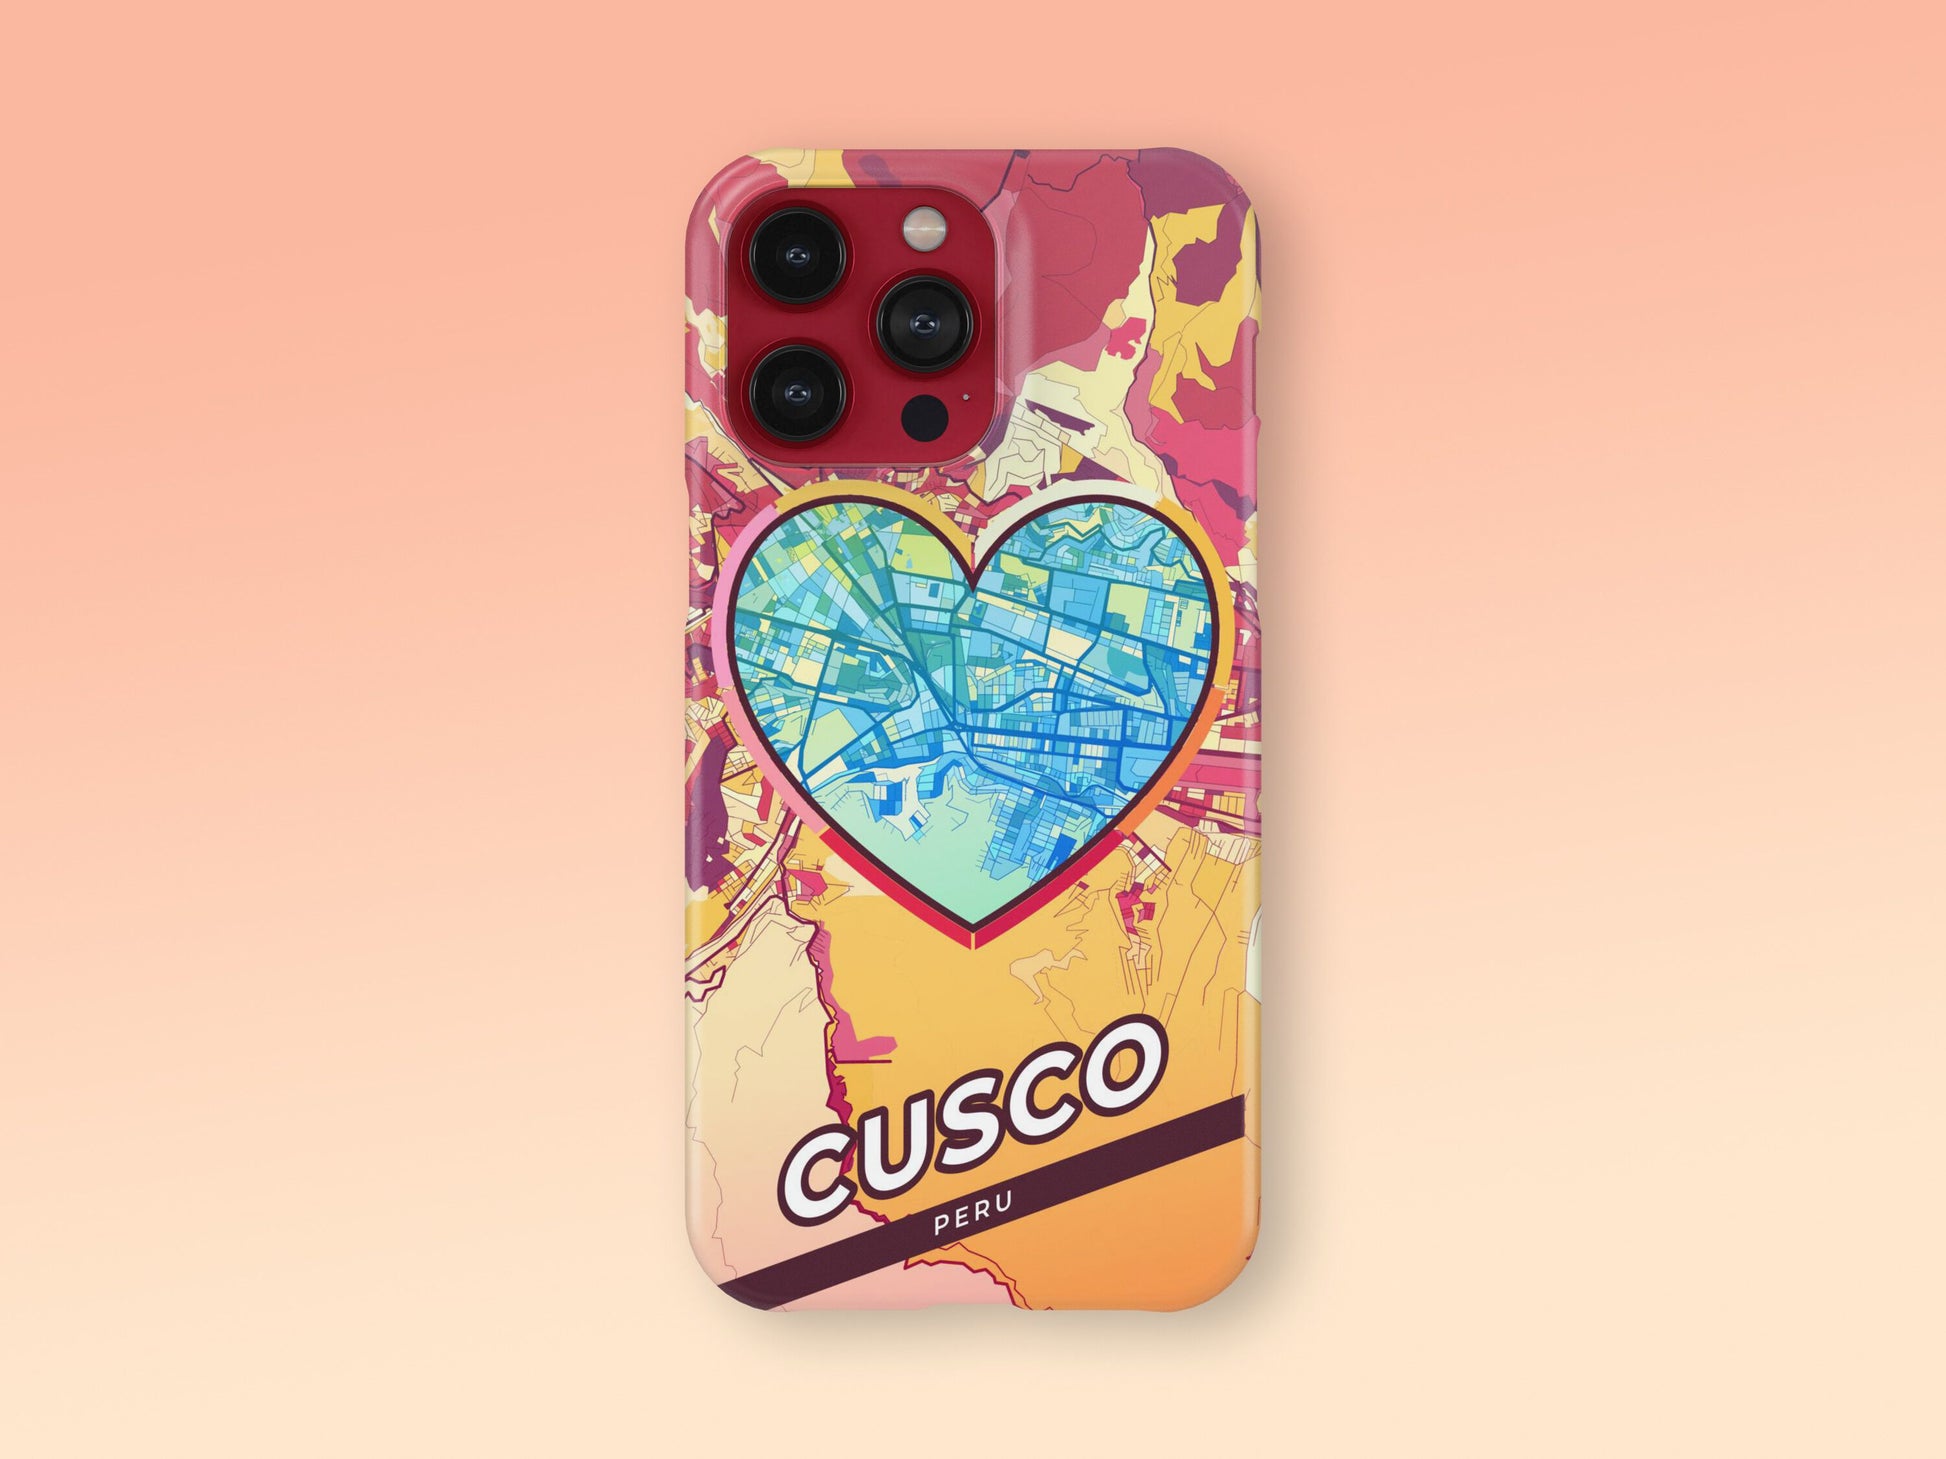 Cusco Peru slim phone case with colorful icon. Birthday, wedding or housewarming gift. Couple match cases. 2